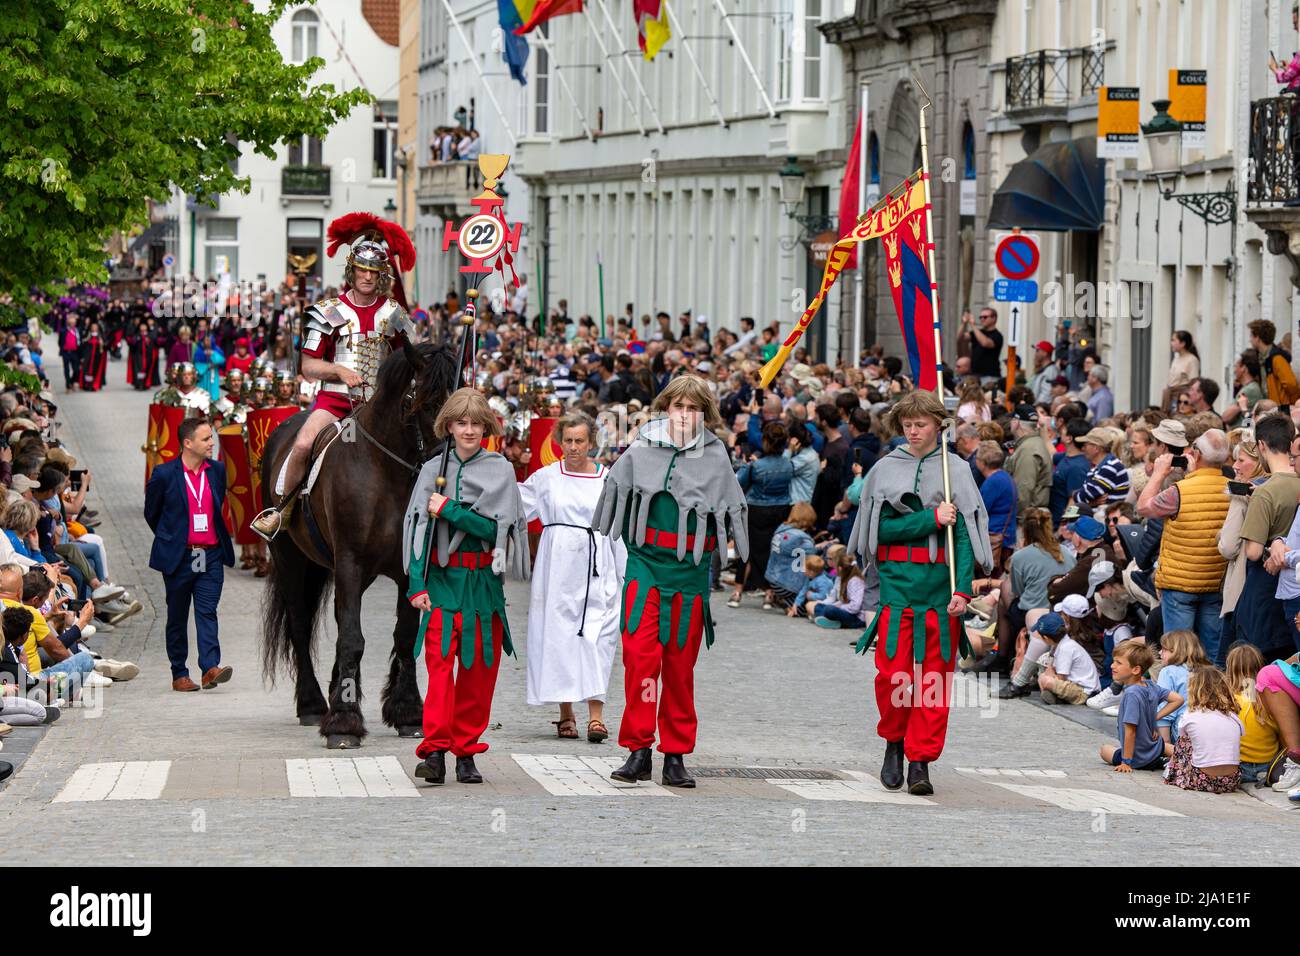 Illustration picture shows the Holy Blood Procession (Heilige Bloedprocessie - Procession Saint-Sang) event, on Thursday 26 May 2022 in Brugge. During Stock Photo